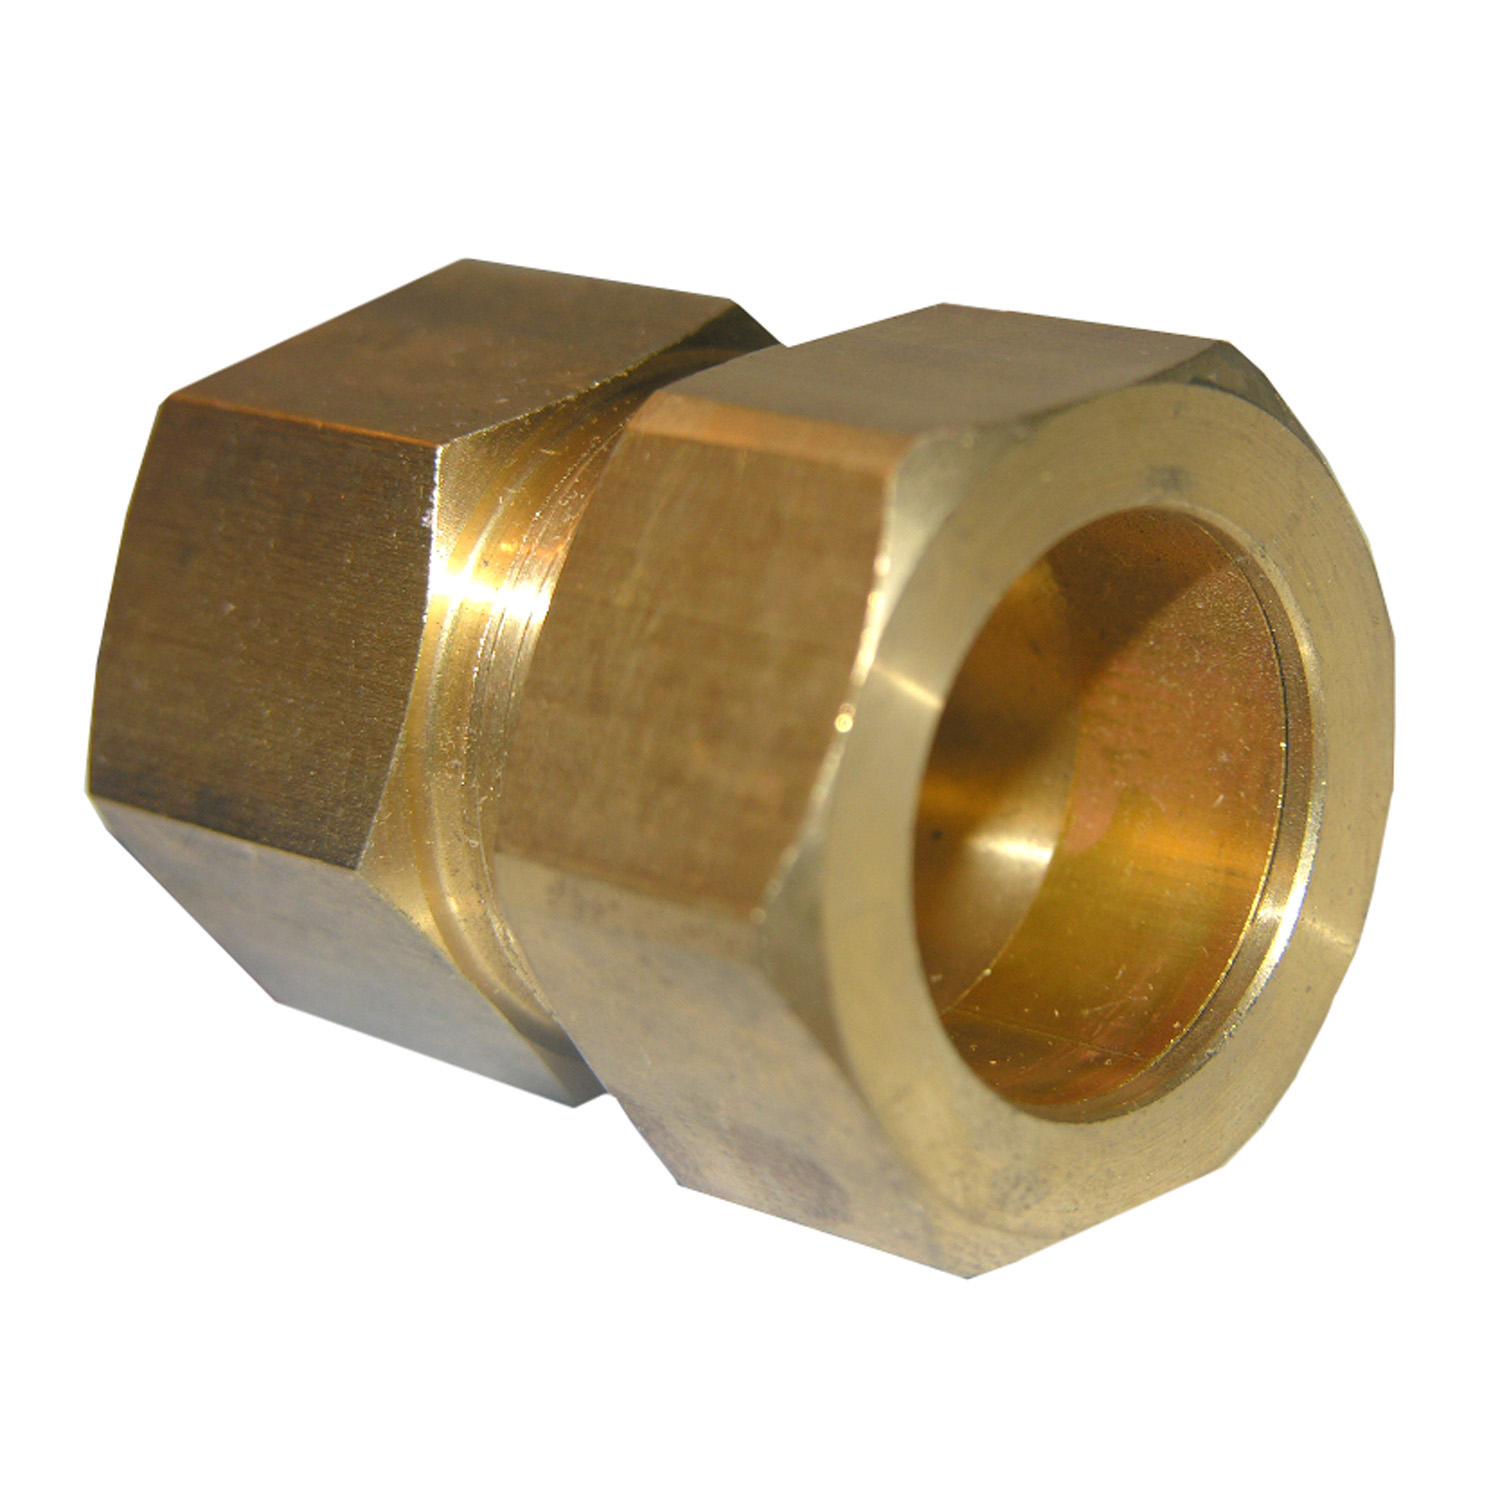 17-6671 Pipe Adapter, 7/8 x 3/4 in, Compression x FPT, Brass, 200 psi Pressure